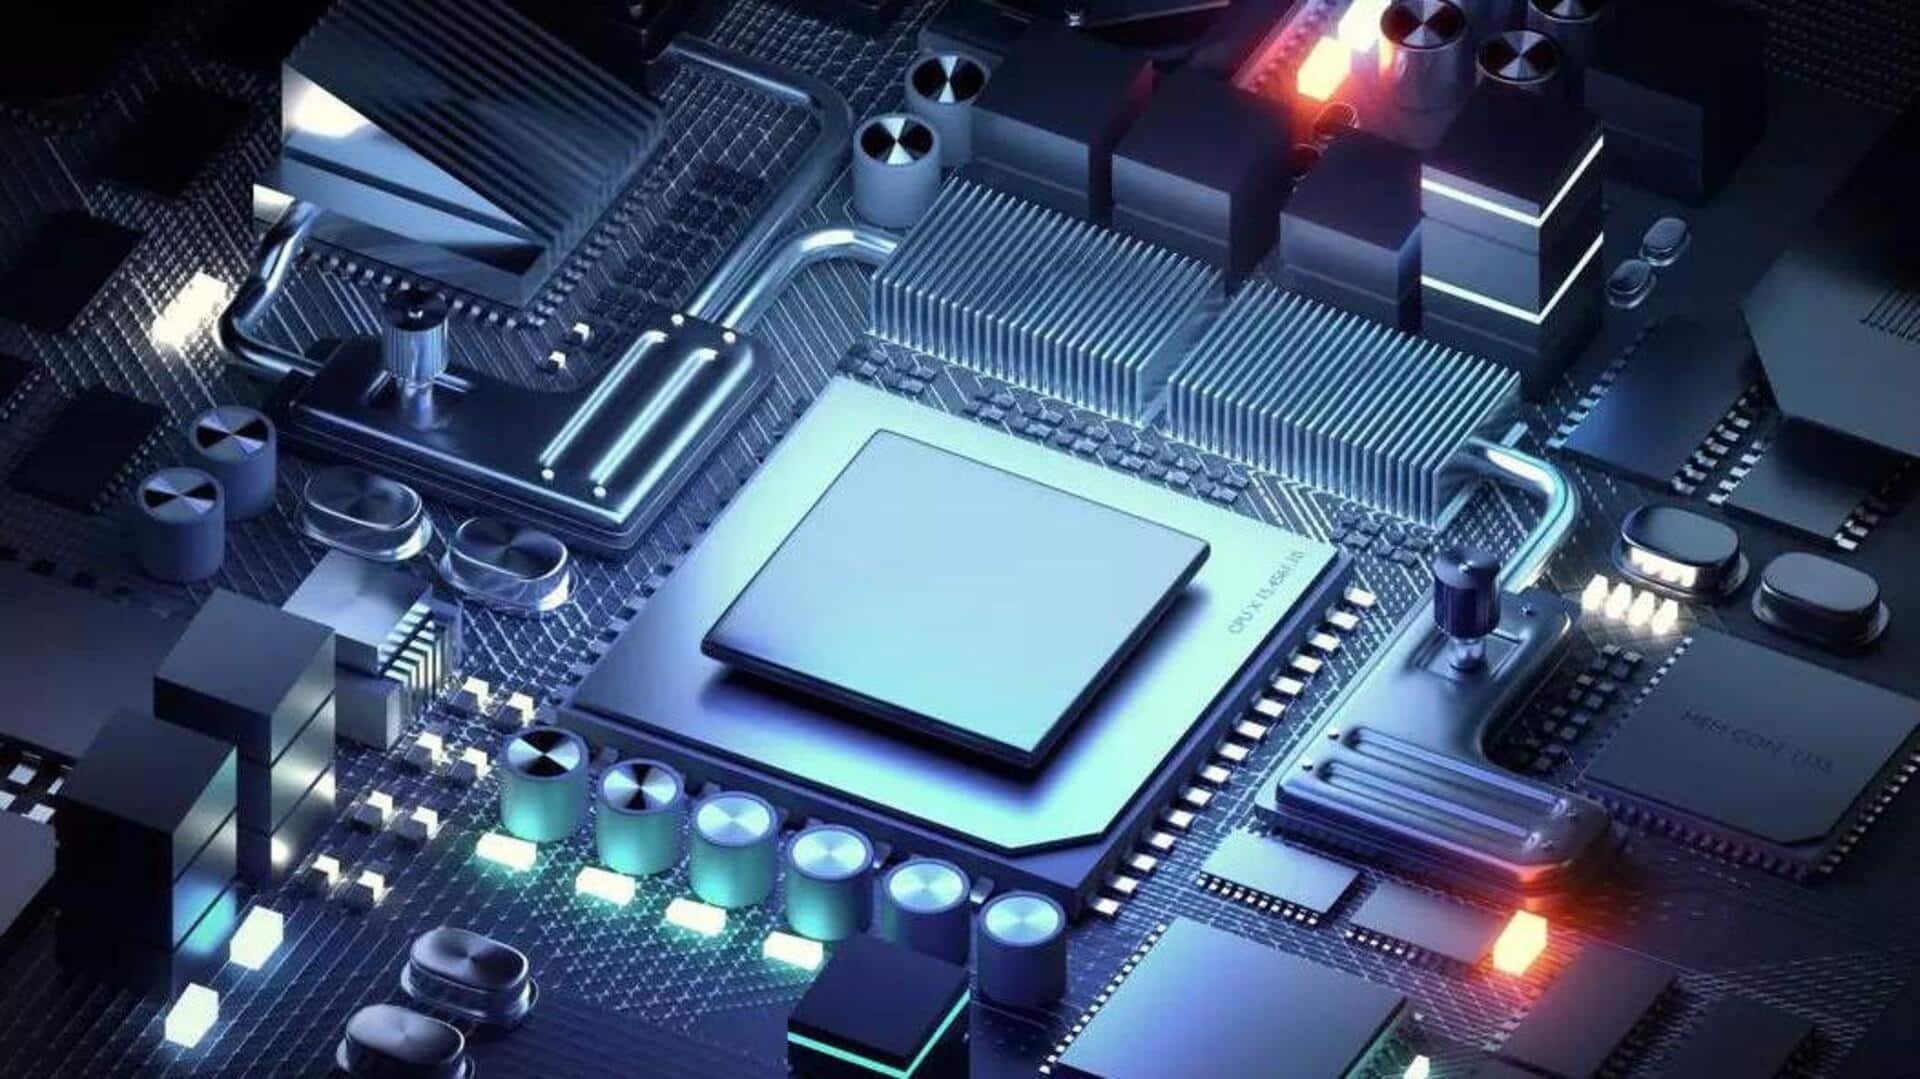 Gujarat in talks with global chipmakers for investments: Chief Minister